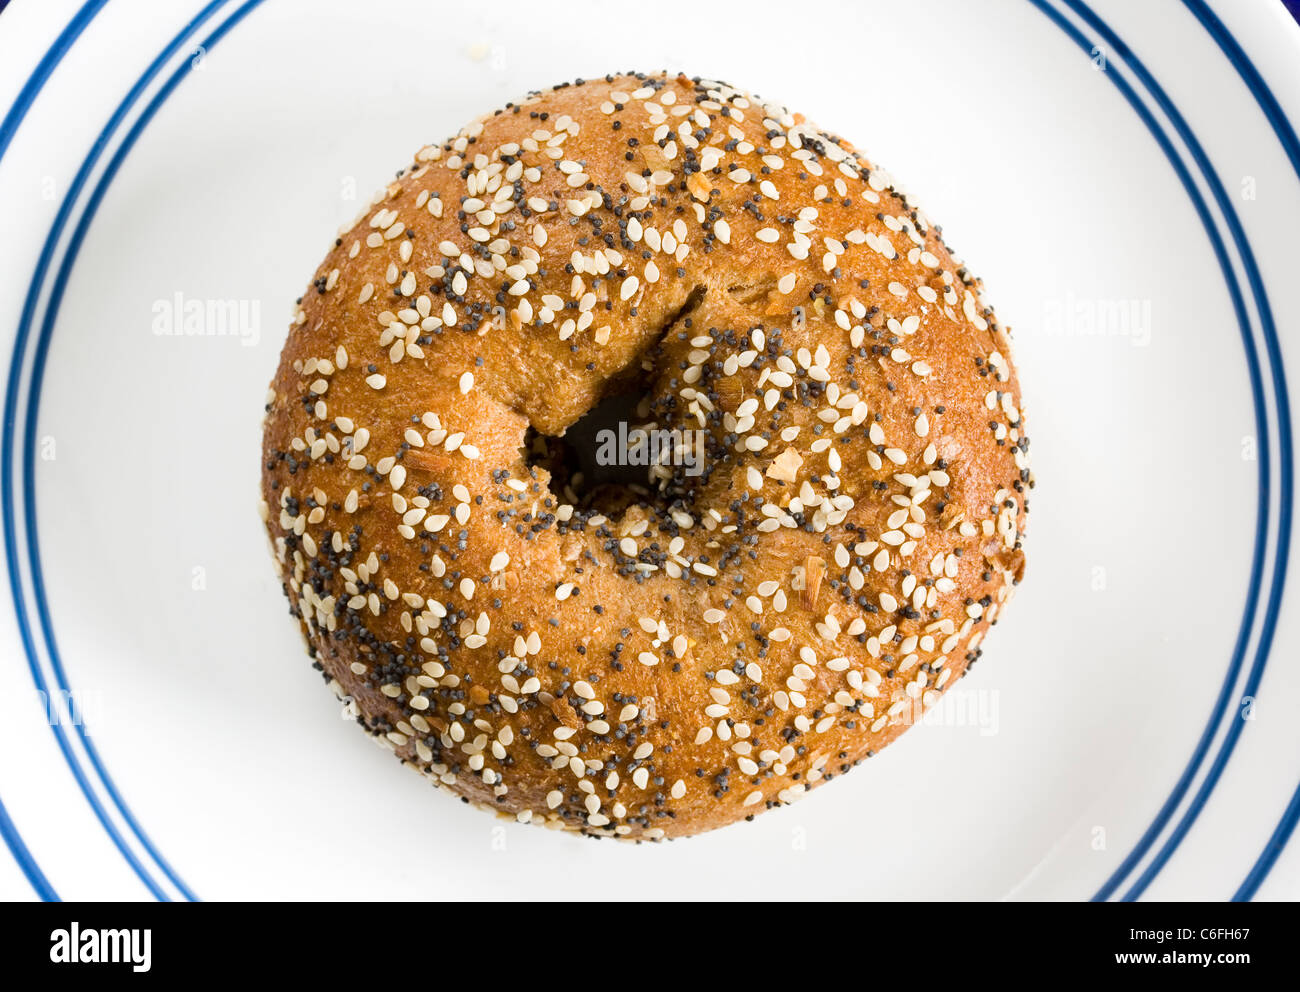 whole wheat bagel with everything topping on a white plate with blue rings Stock Photo